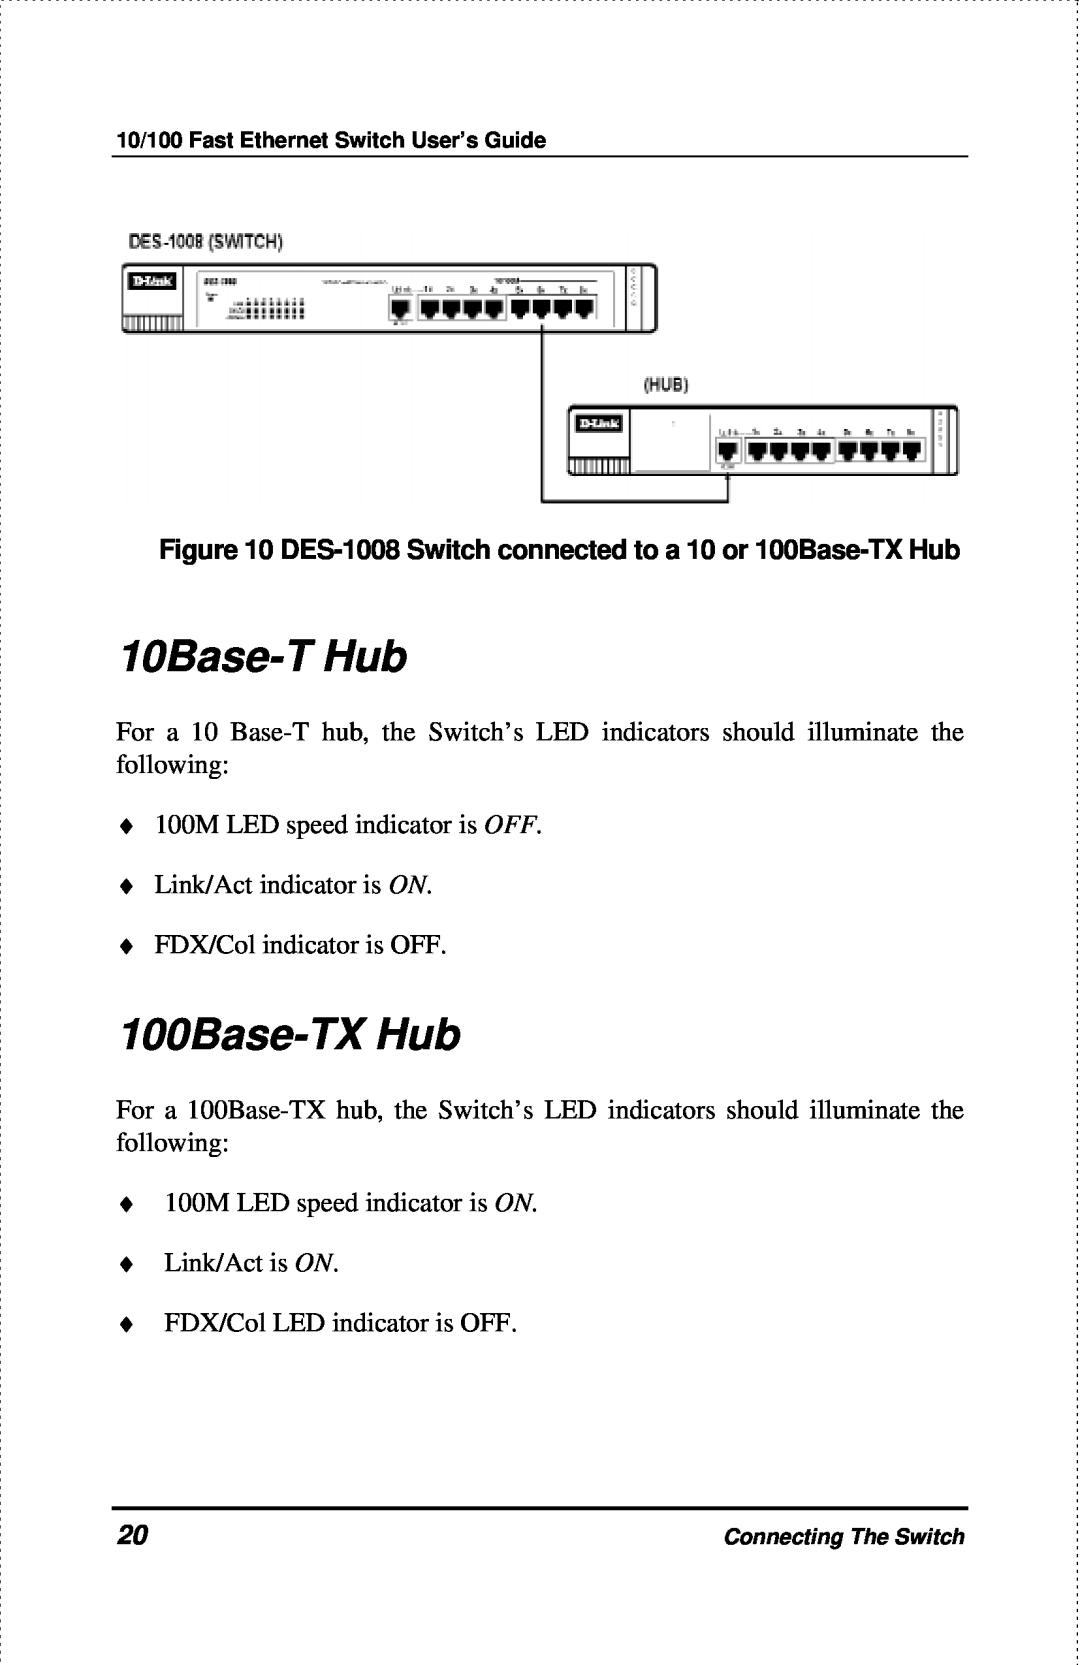 D-Link DES-1004 manual 10Base-T Hub, DES-1008 Switch connected to a 10 or 100Base-TX Hub 